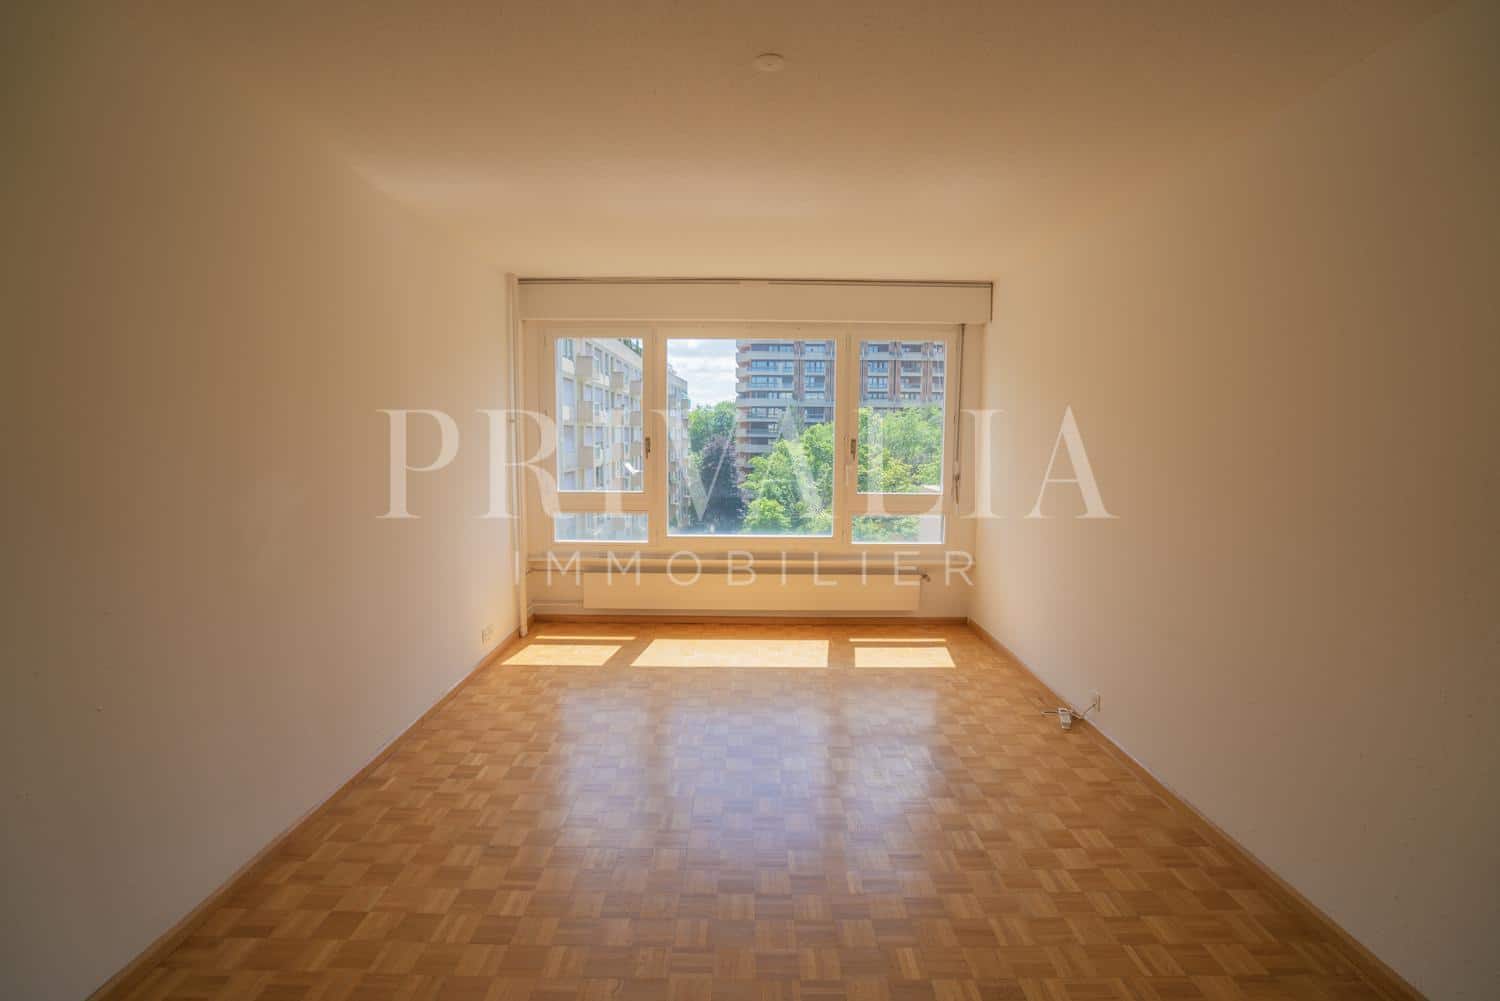 PrivaliaBeautiful 3-room apartment on a high floor with balcony